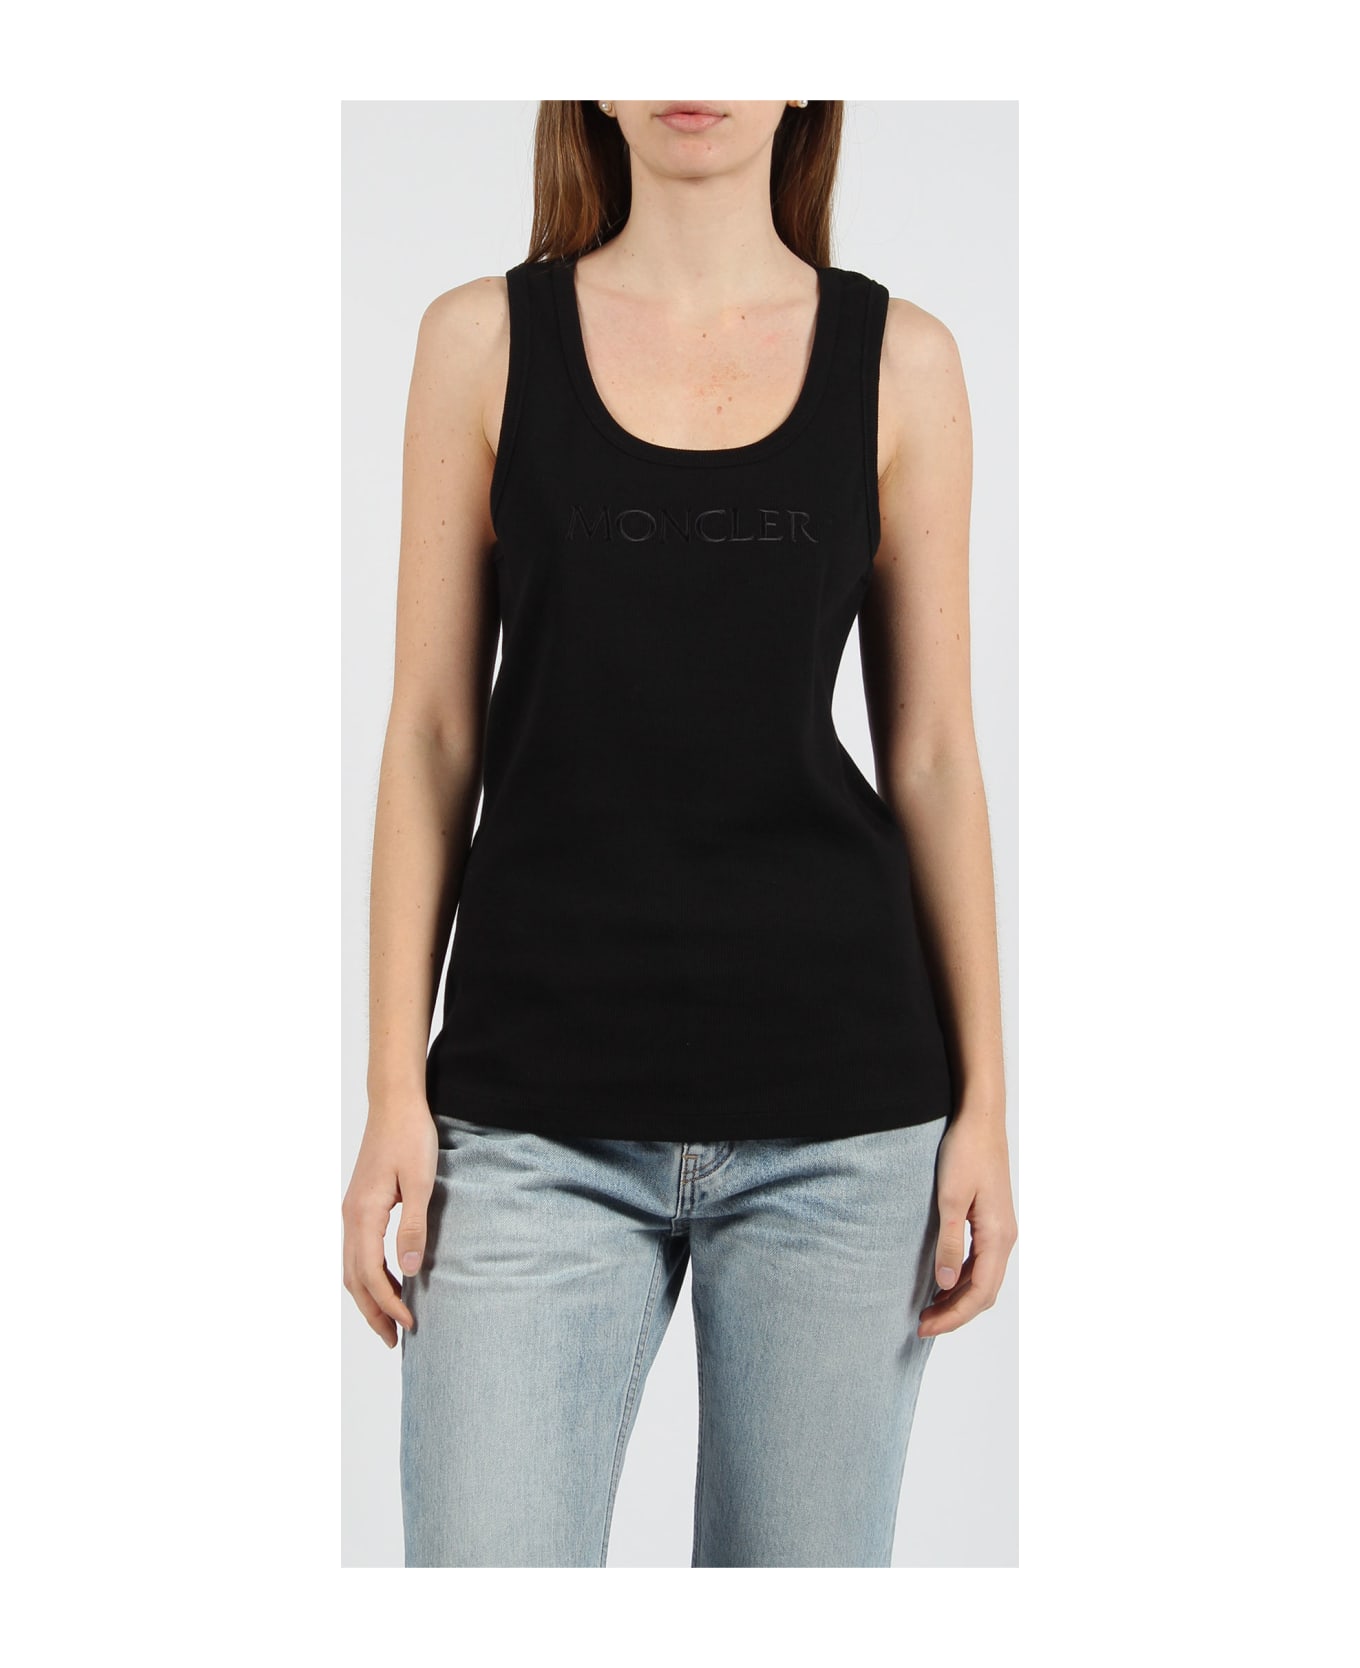 Moncler Embroidered Logo Ribbed Tank Top - Black